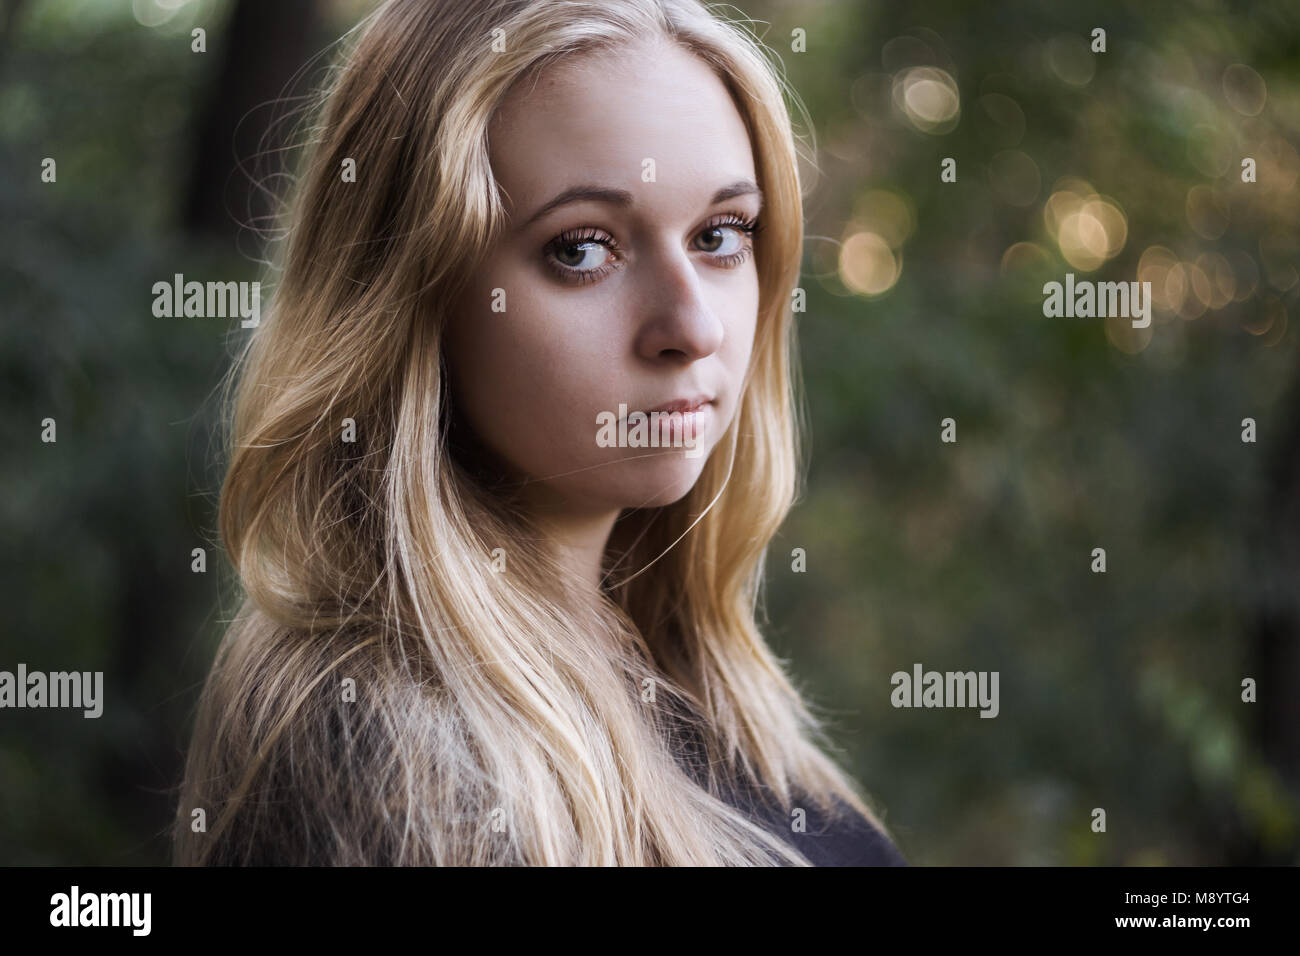 Portrait of a beautiful young woman with long blond hair Stock Photo